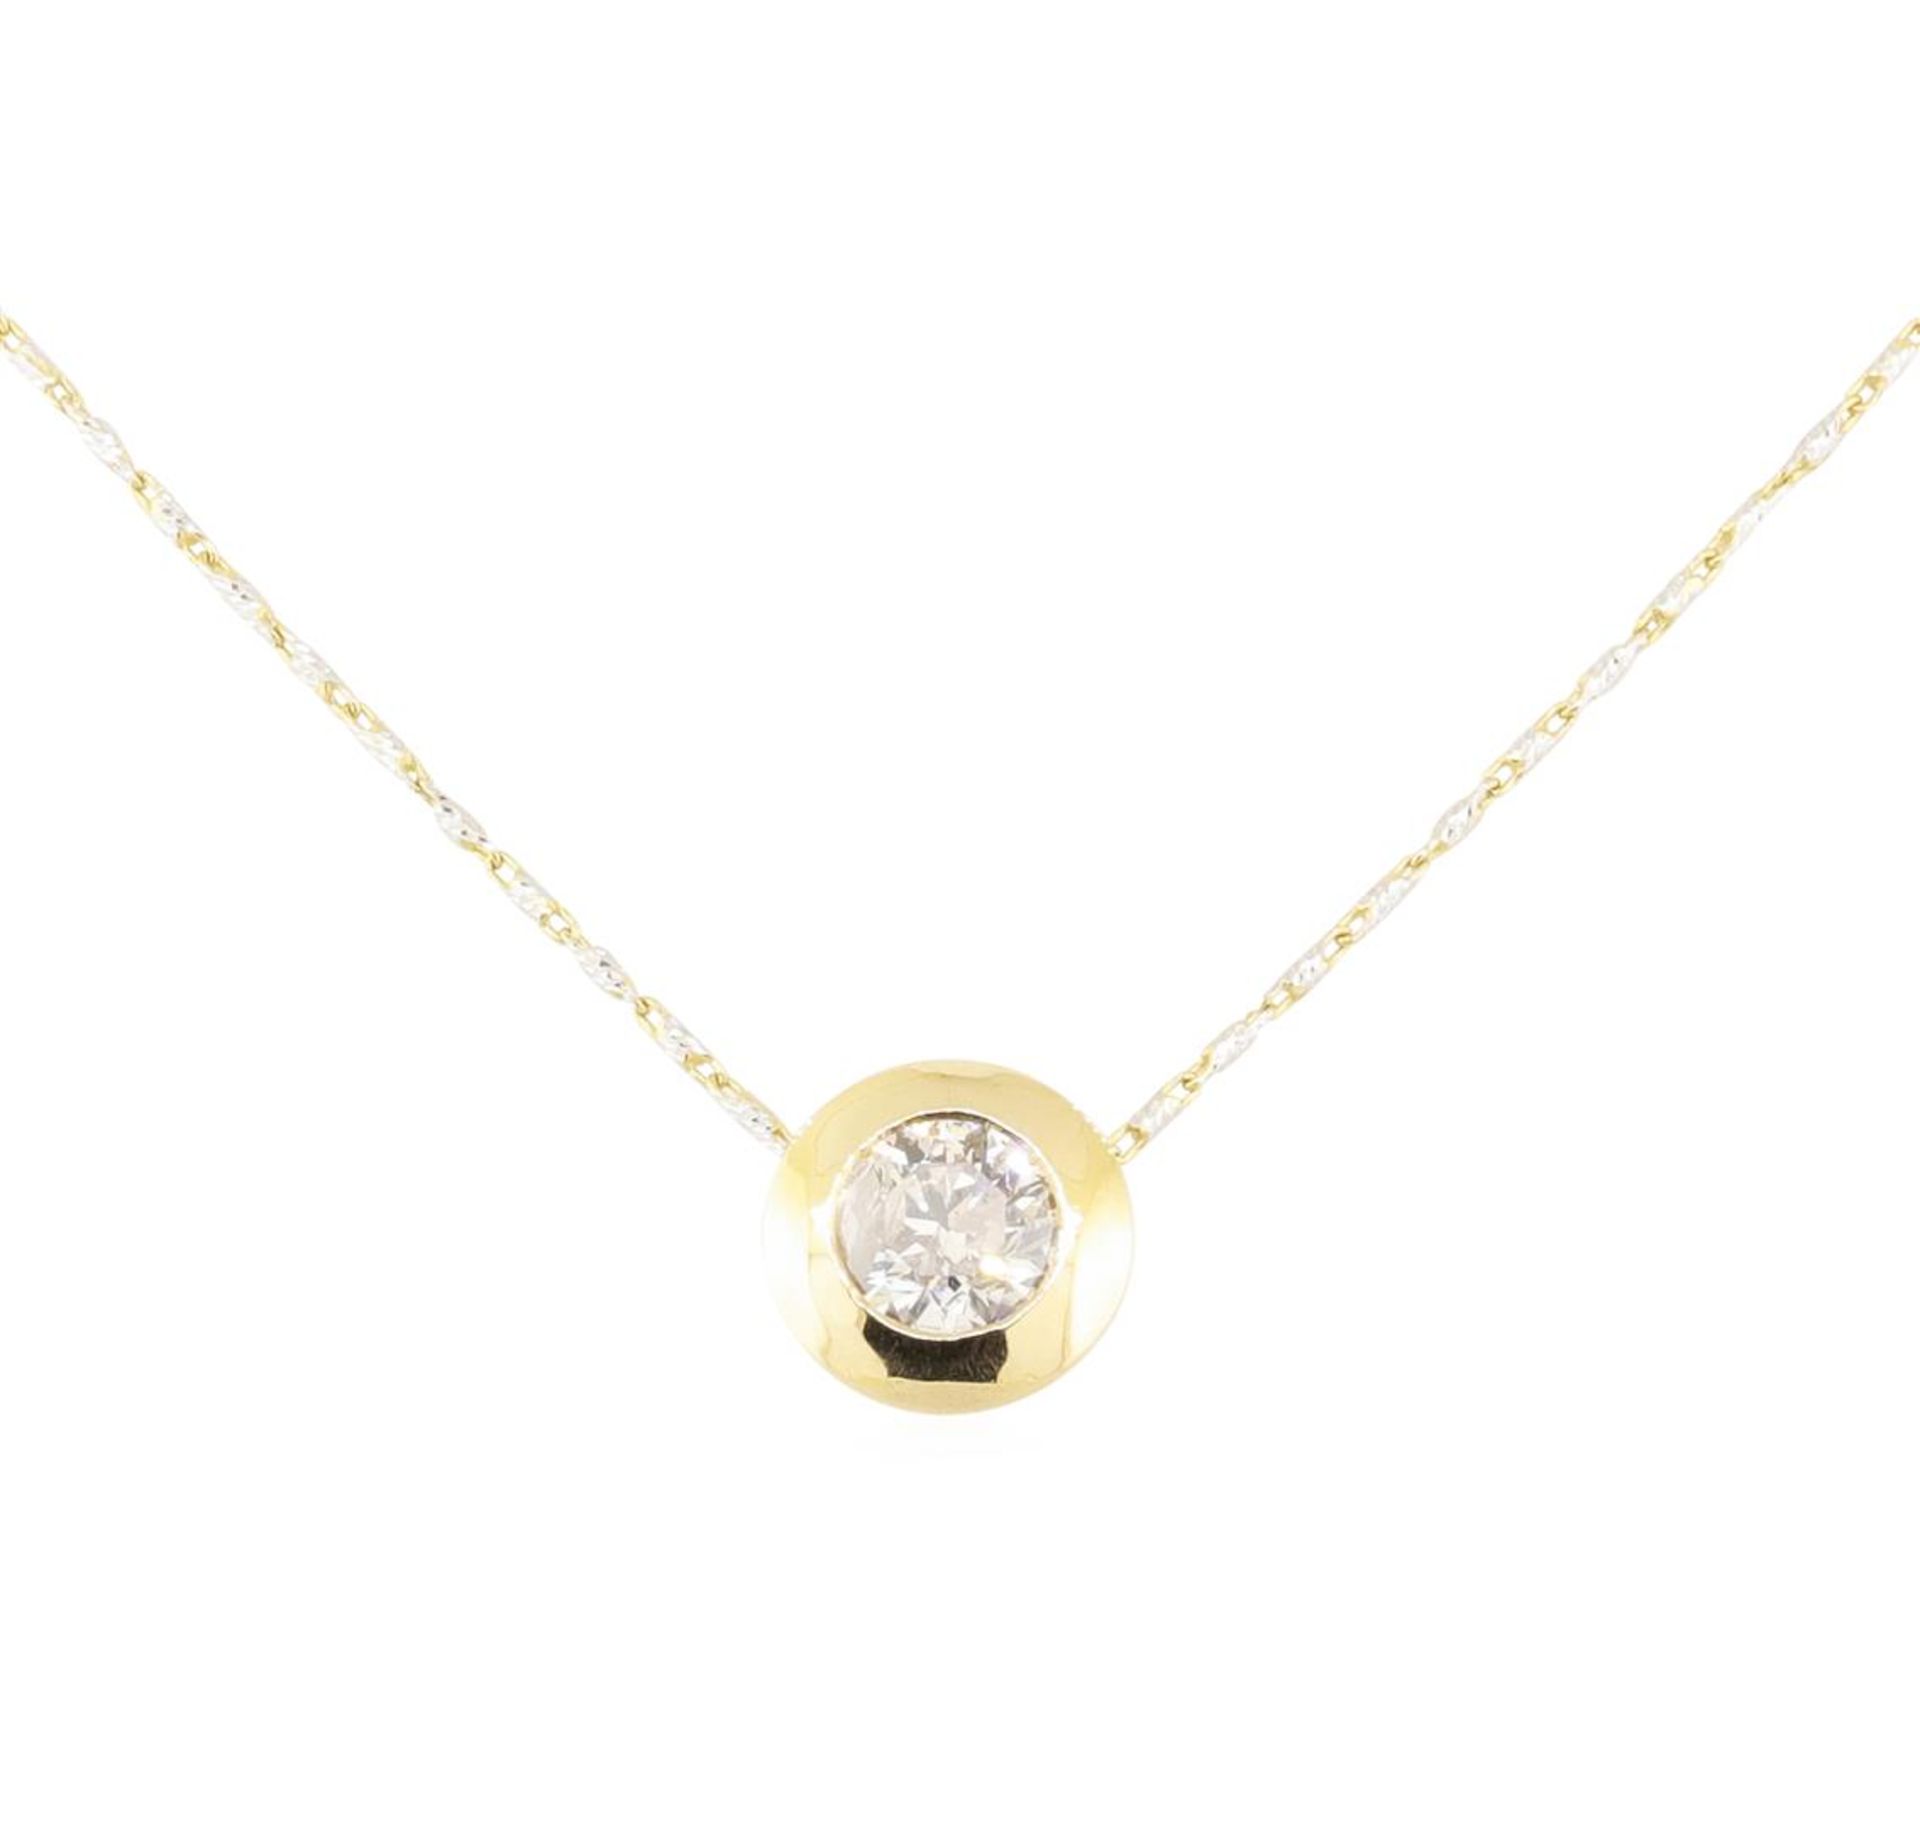 1.02 ctw Diamond Necklace - 14KT Yellow Gold - Image 2 of 2